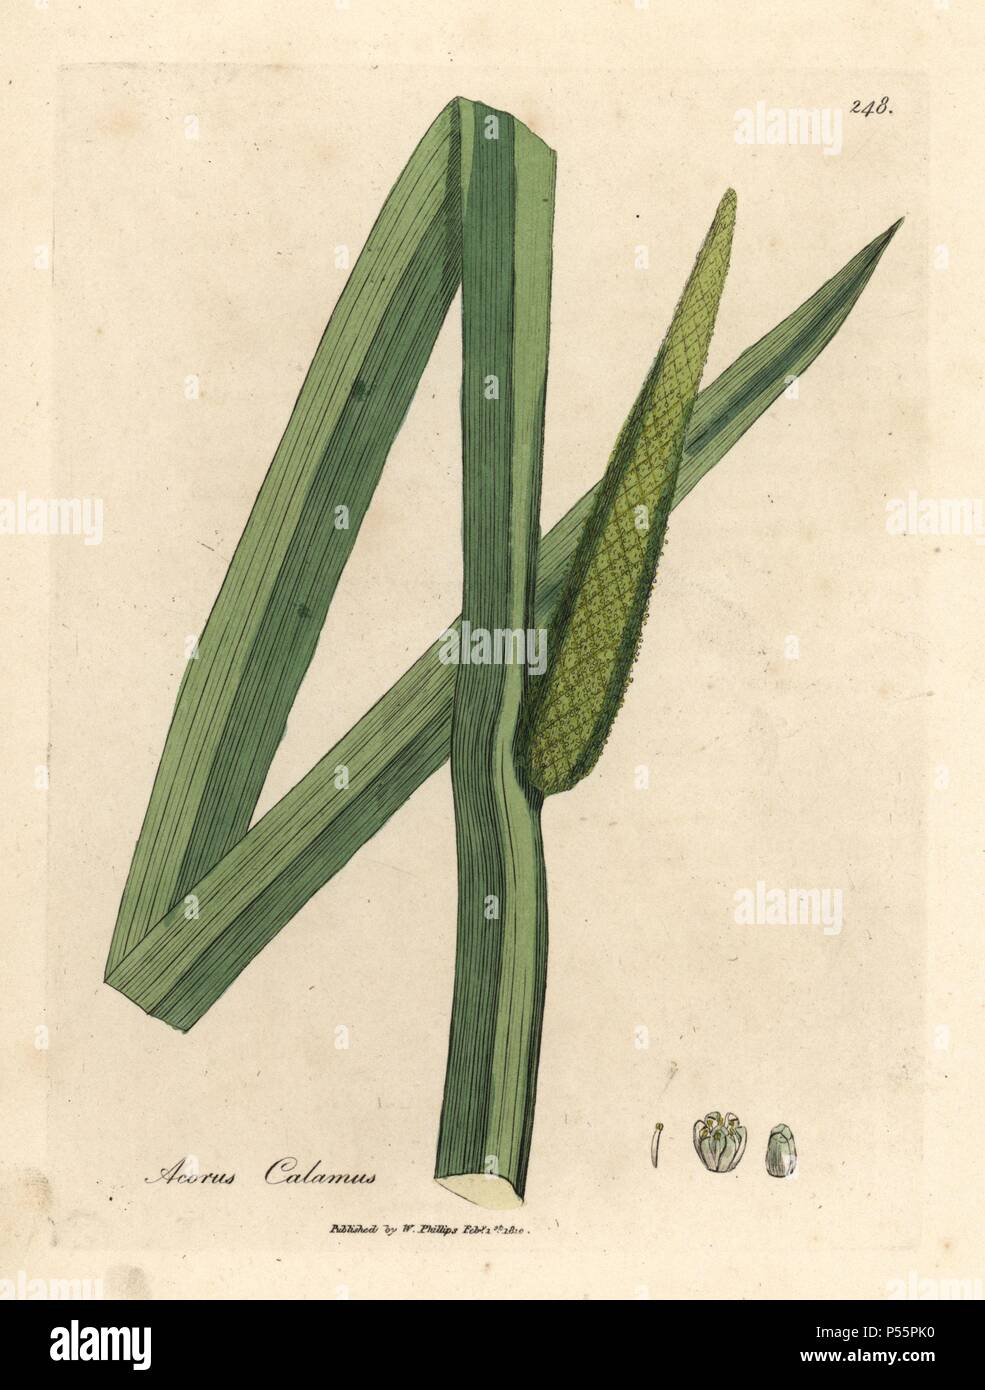 Long sword-shaped leaf and conical spike flower of the Sweet flag, Acorus calamus. Handcolored copperplate engraving from a botanical illustration by James Sowerby from William Woodville and Sir William Jackson Hooker's 'Medical Botany' 1832. The tireless Sowerby (1757-1822) drew over 2,500 plants for Smith's mammoth 'English Botany' (1790-1814) and 440 mushrooms for 'Coloured Figures of English Fungi ' (1797) among many other works. Stock Photo